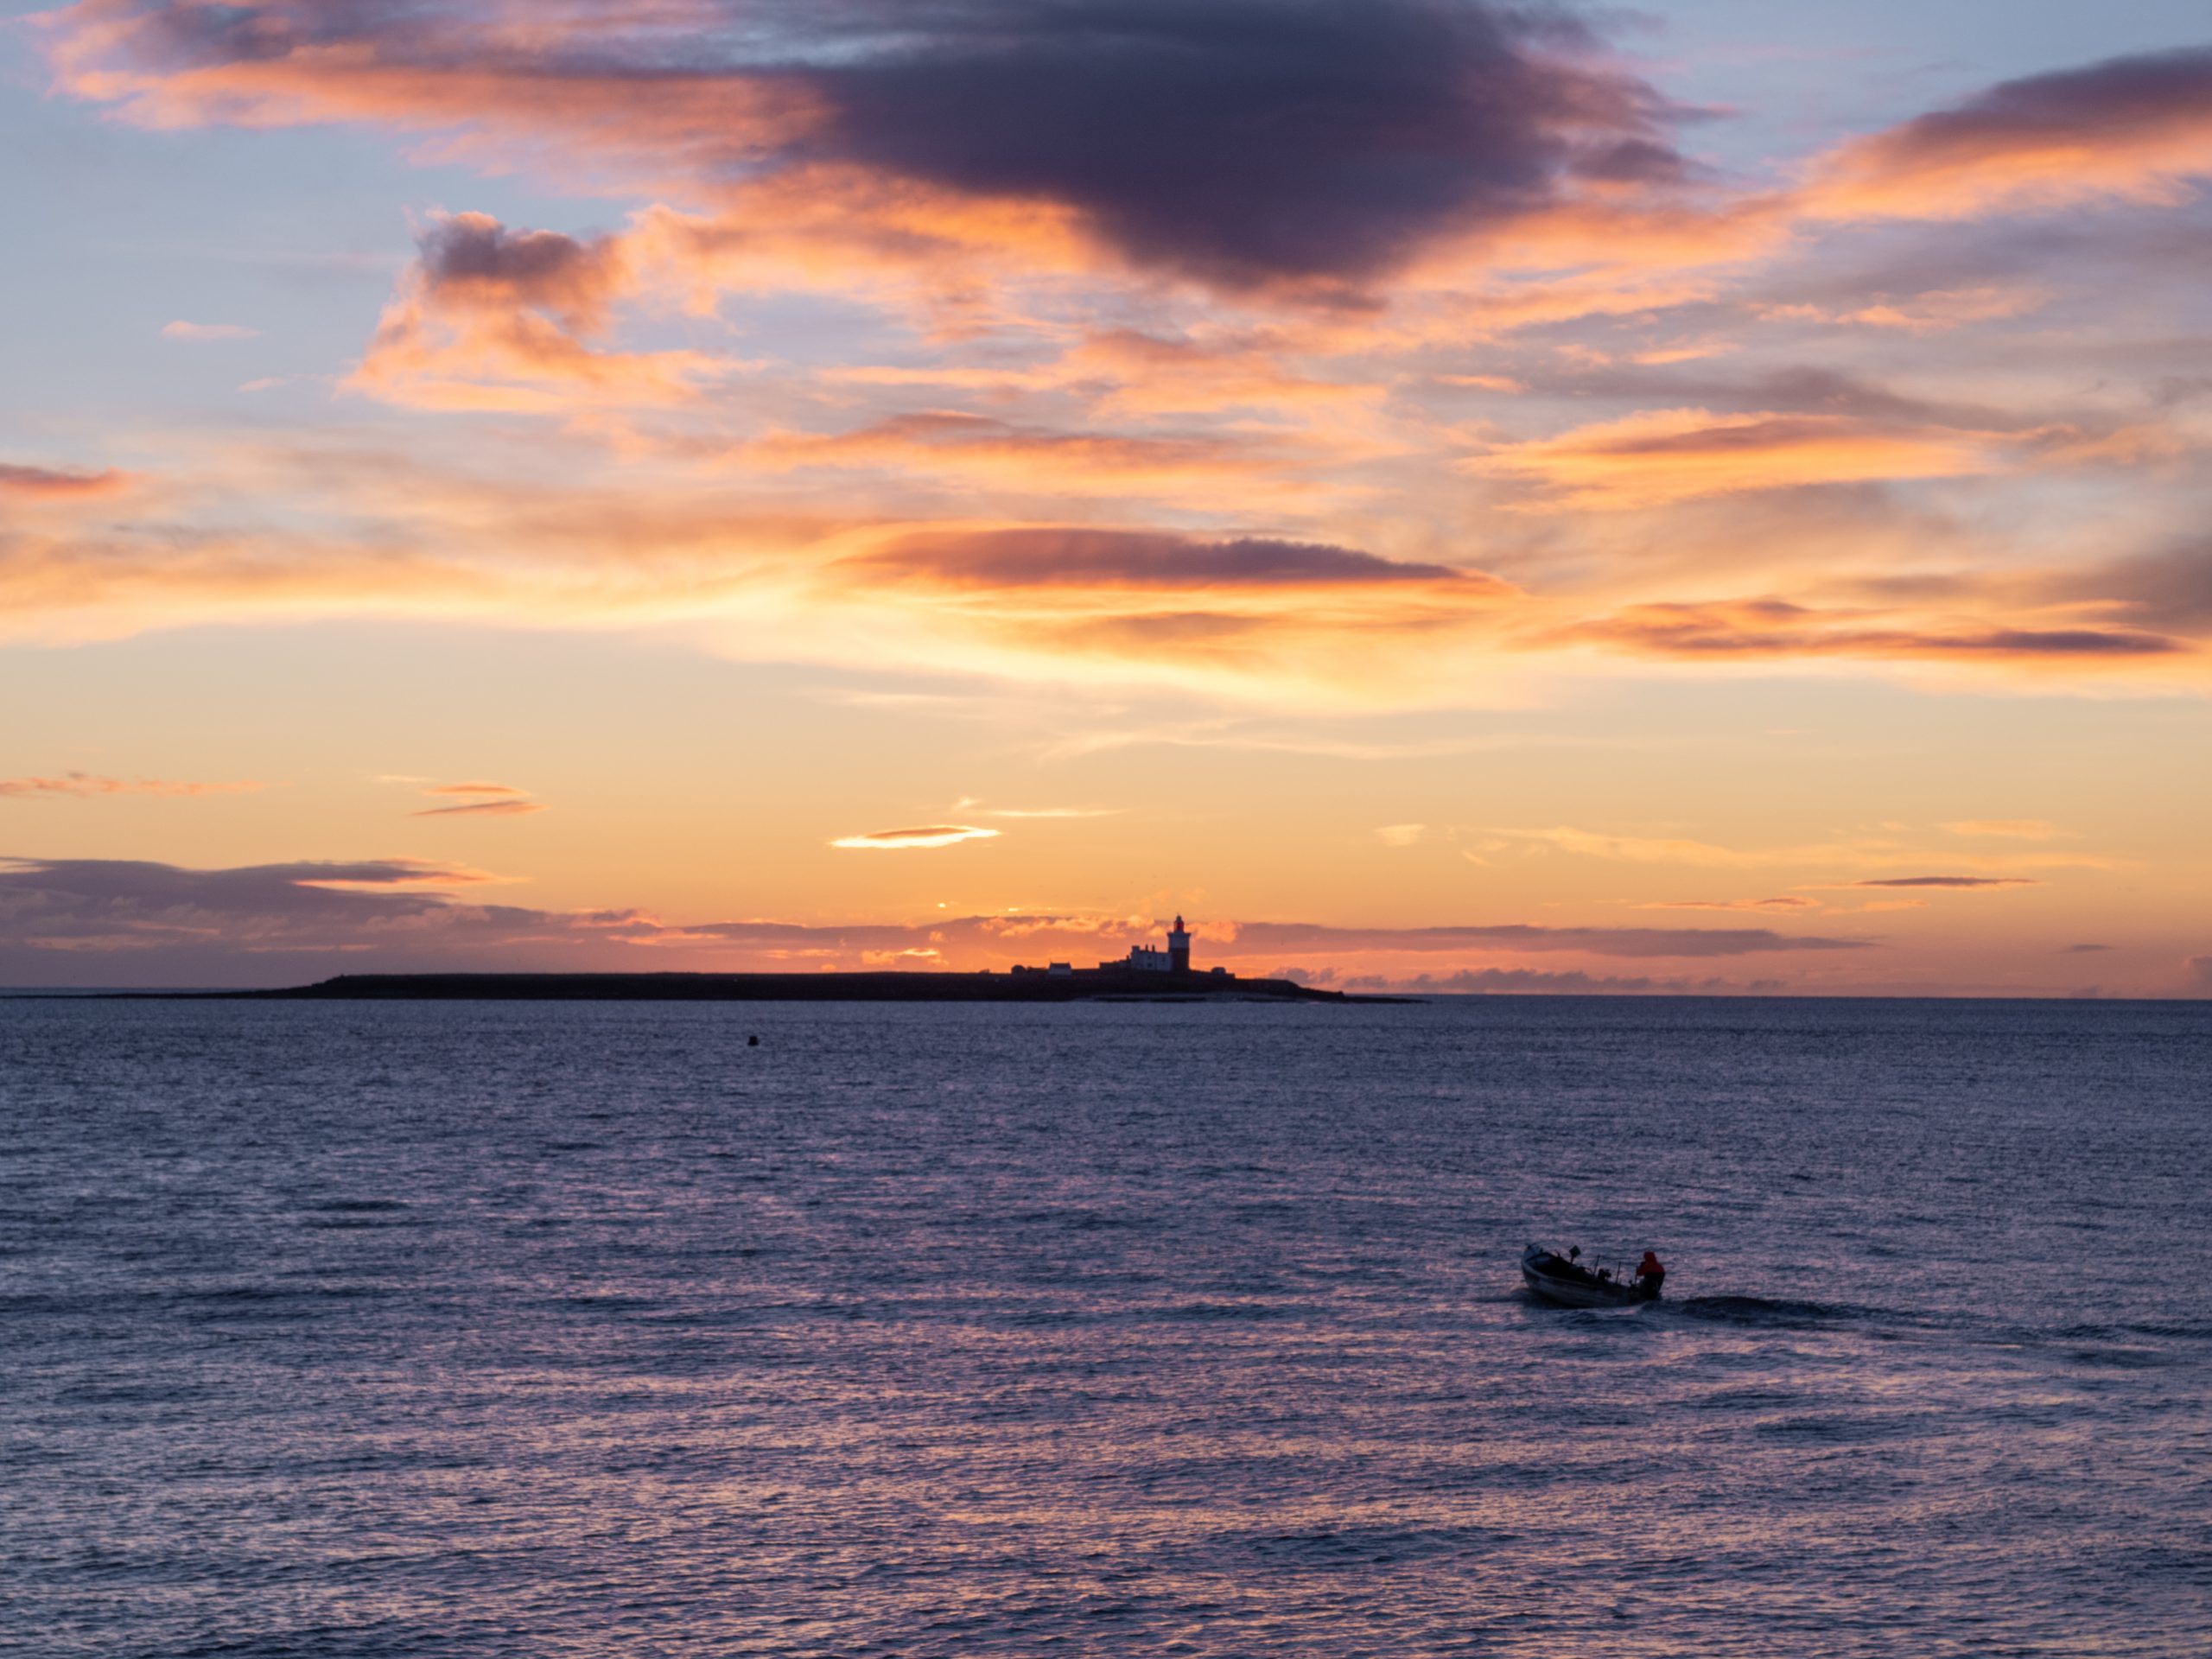 Coquet island and boat